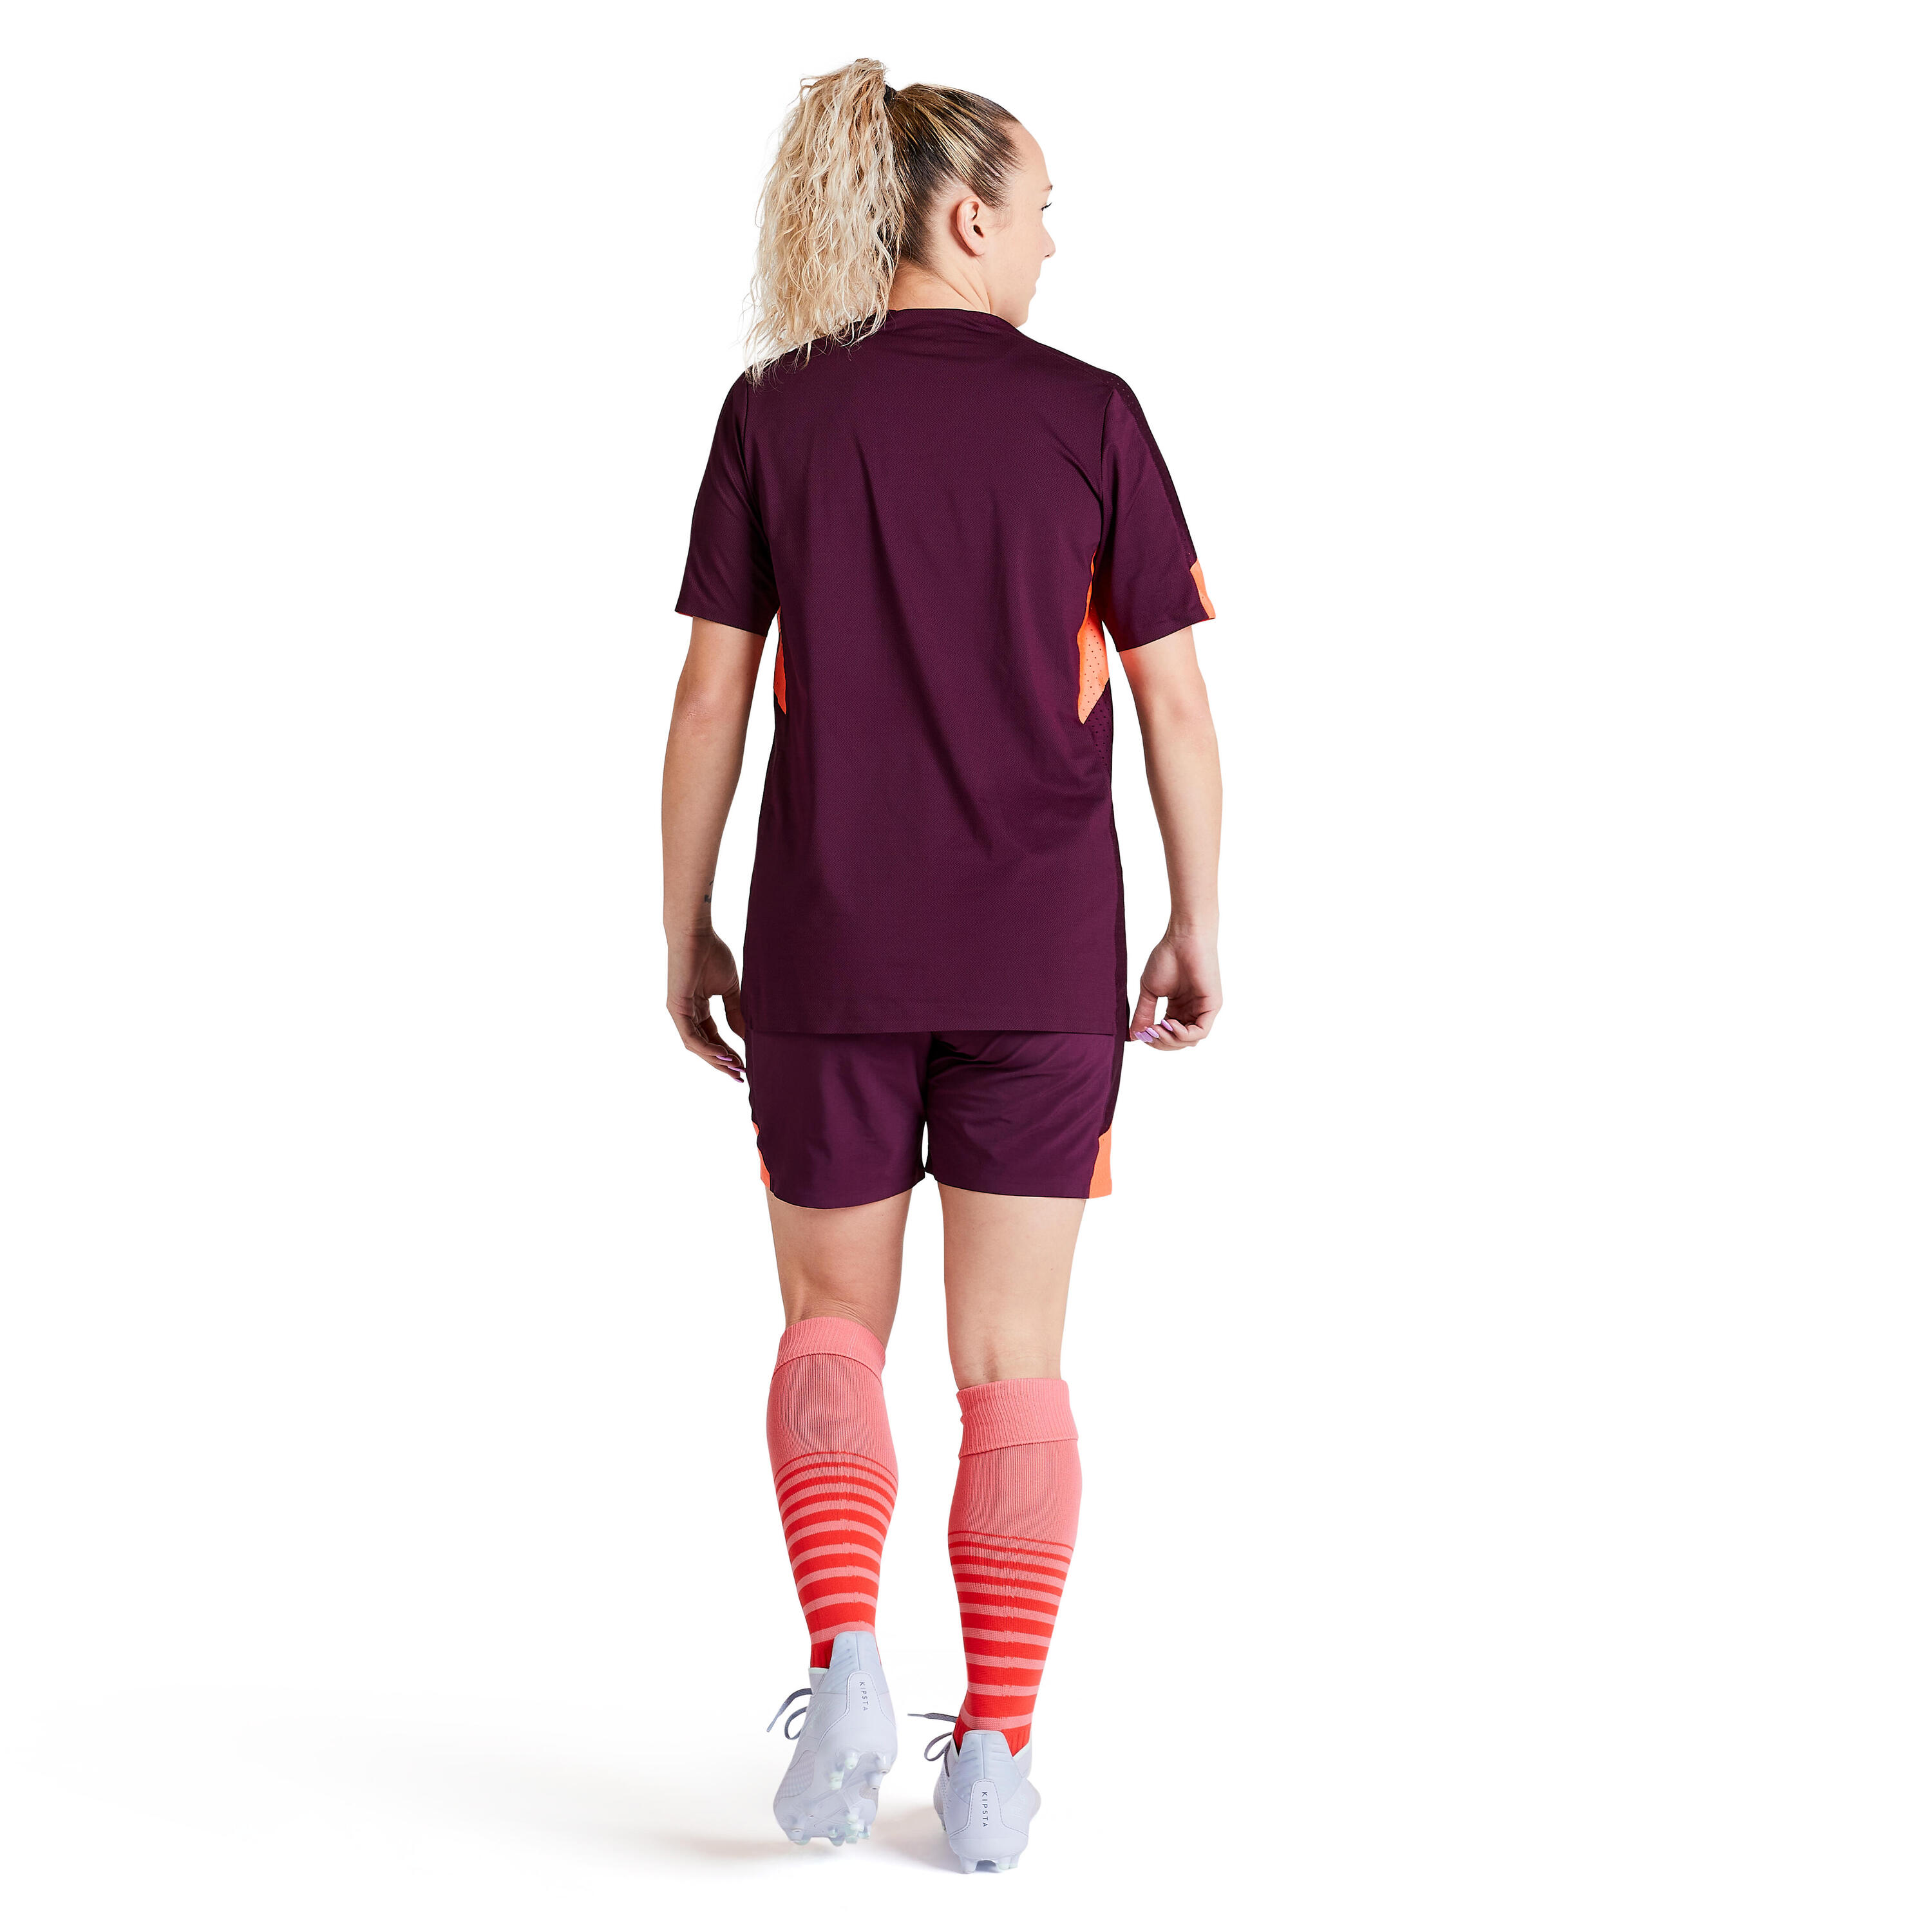 Women's Football Jersey F900 - Coral 9/31